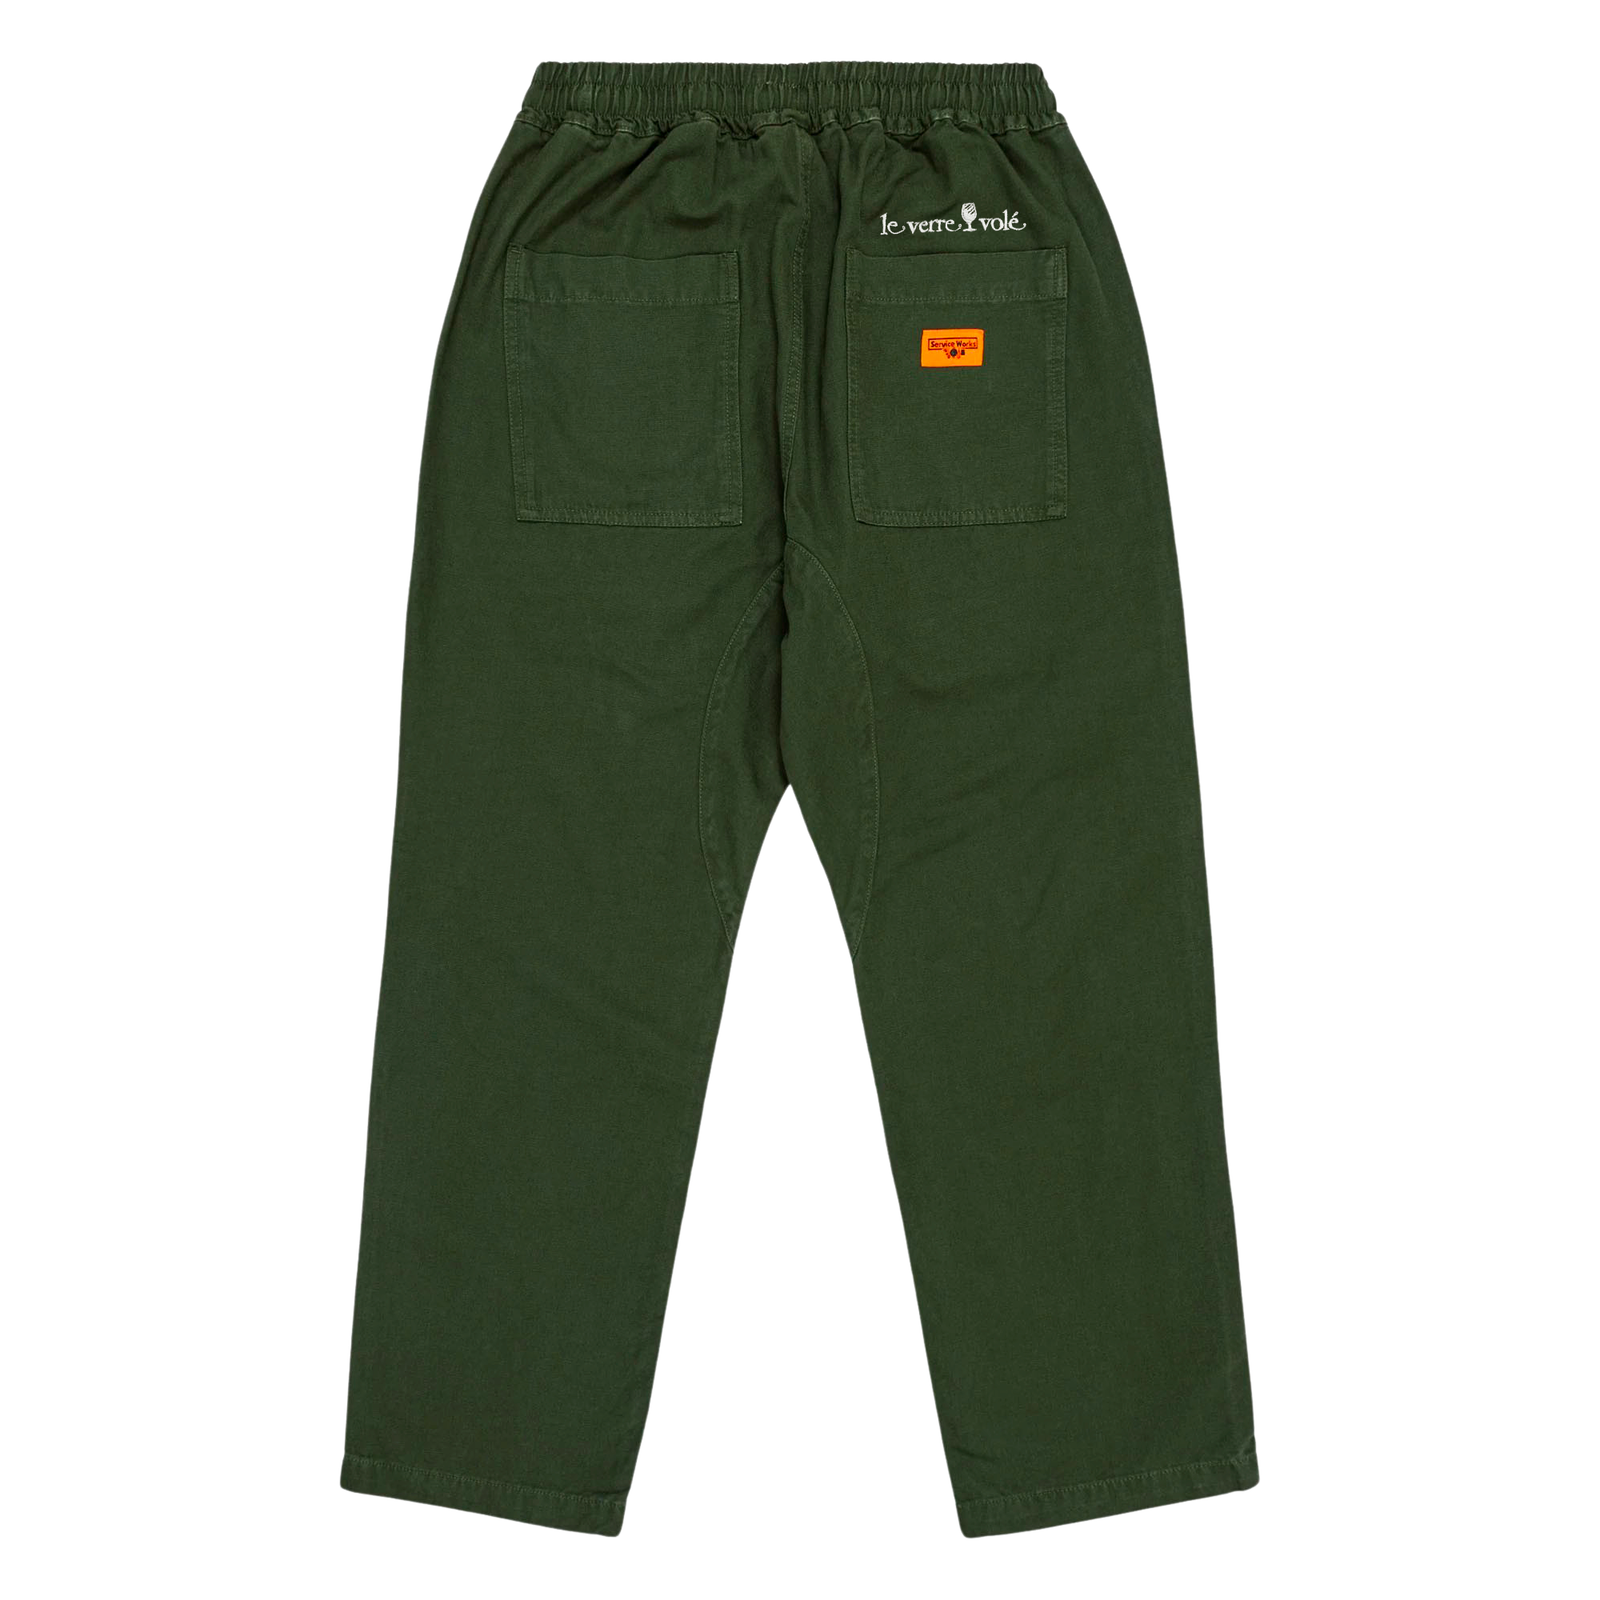 Le Verre Vole X Service Works Olive Chef Pants-1